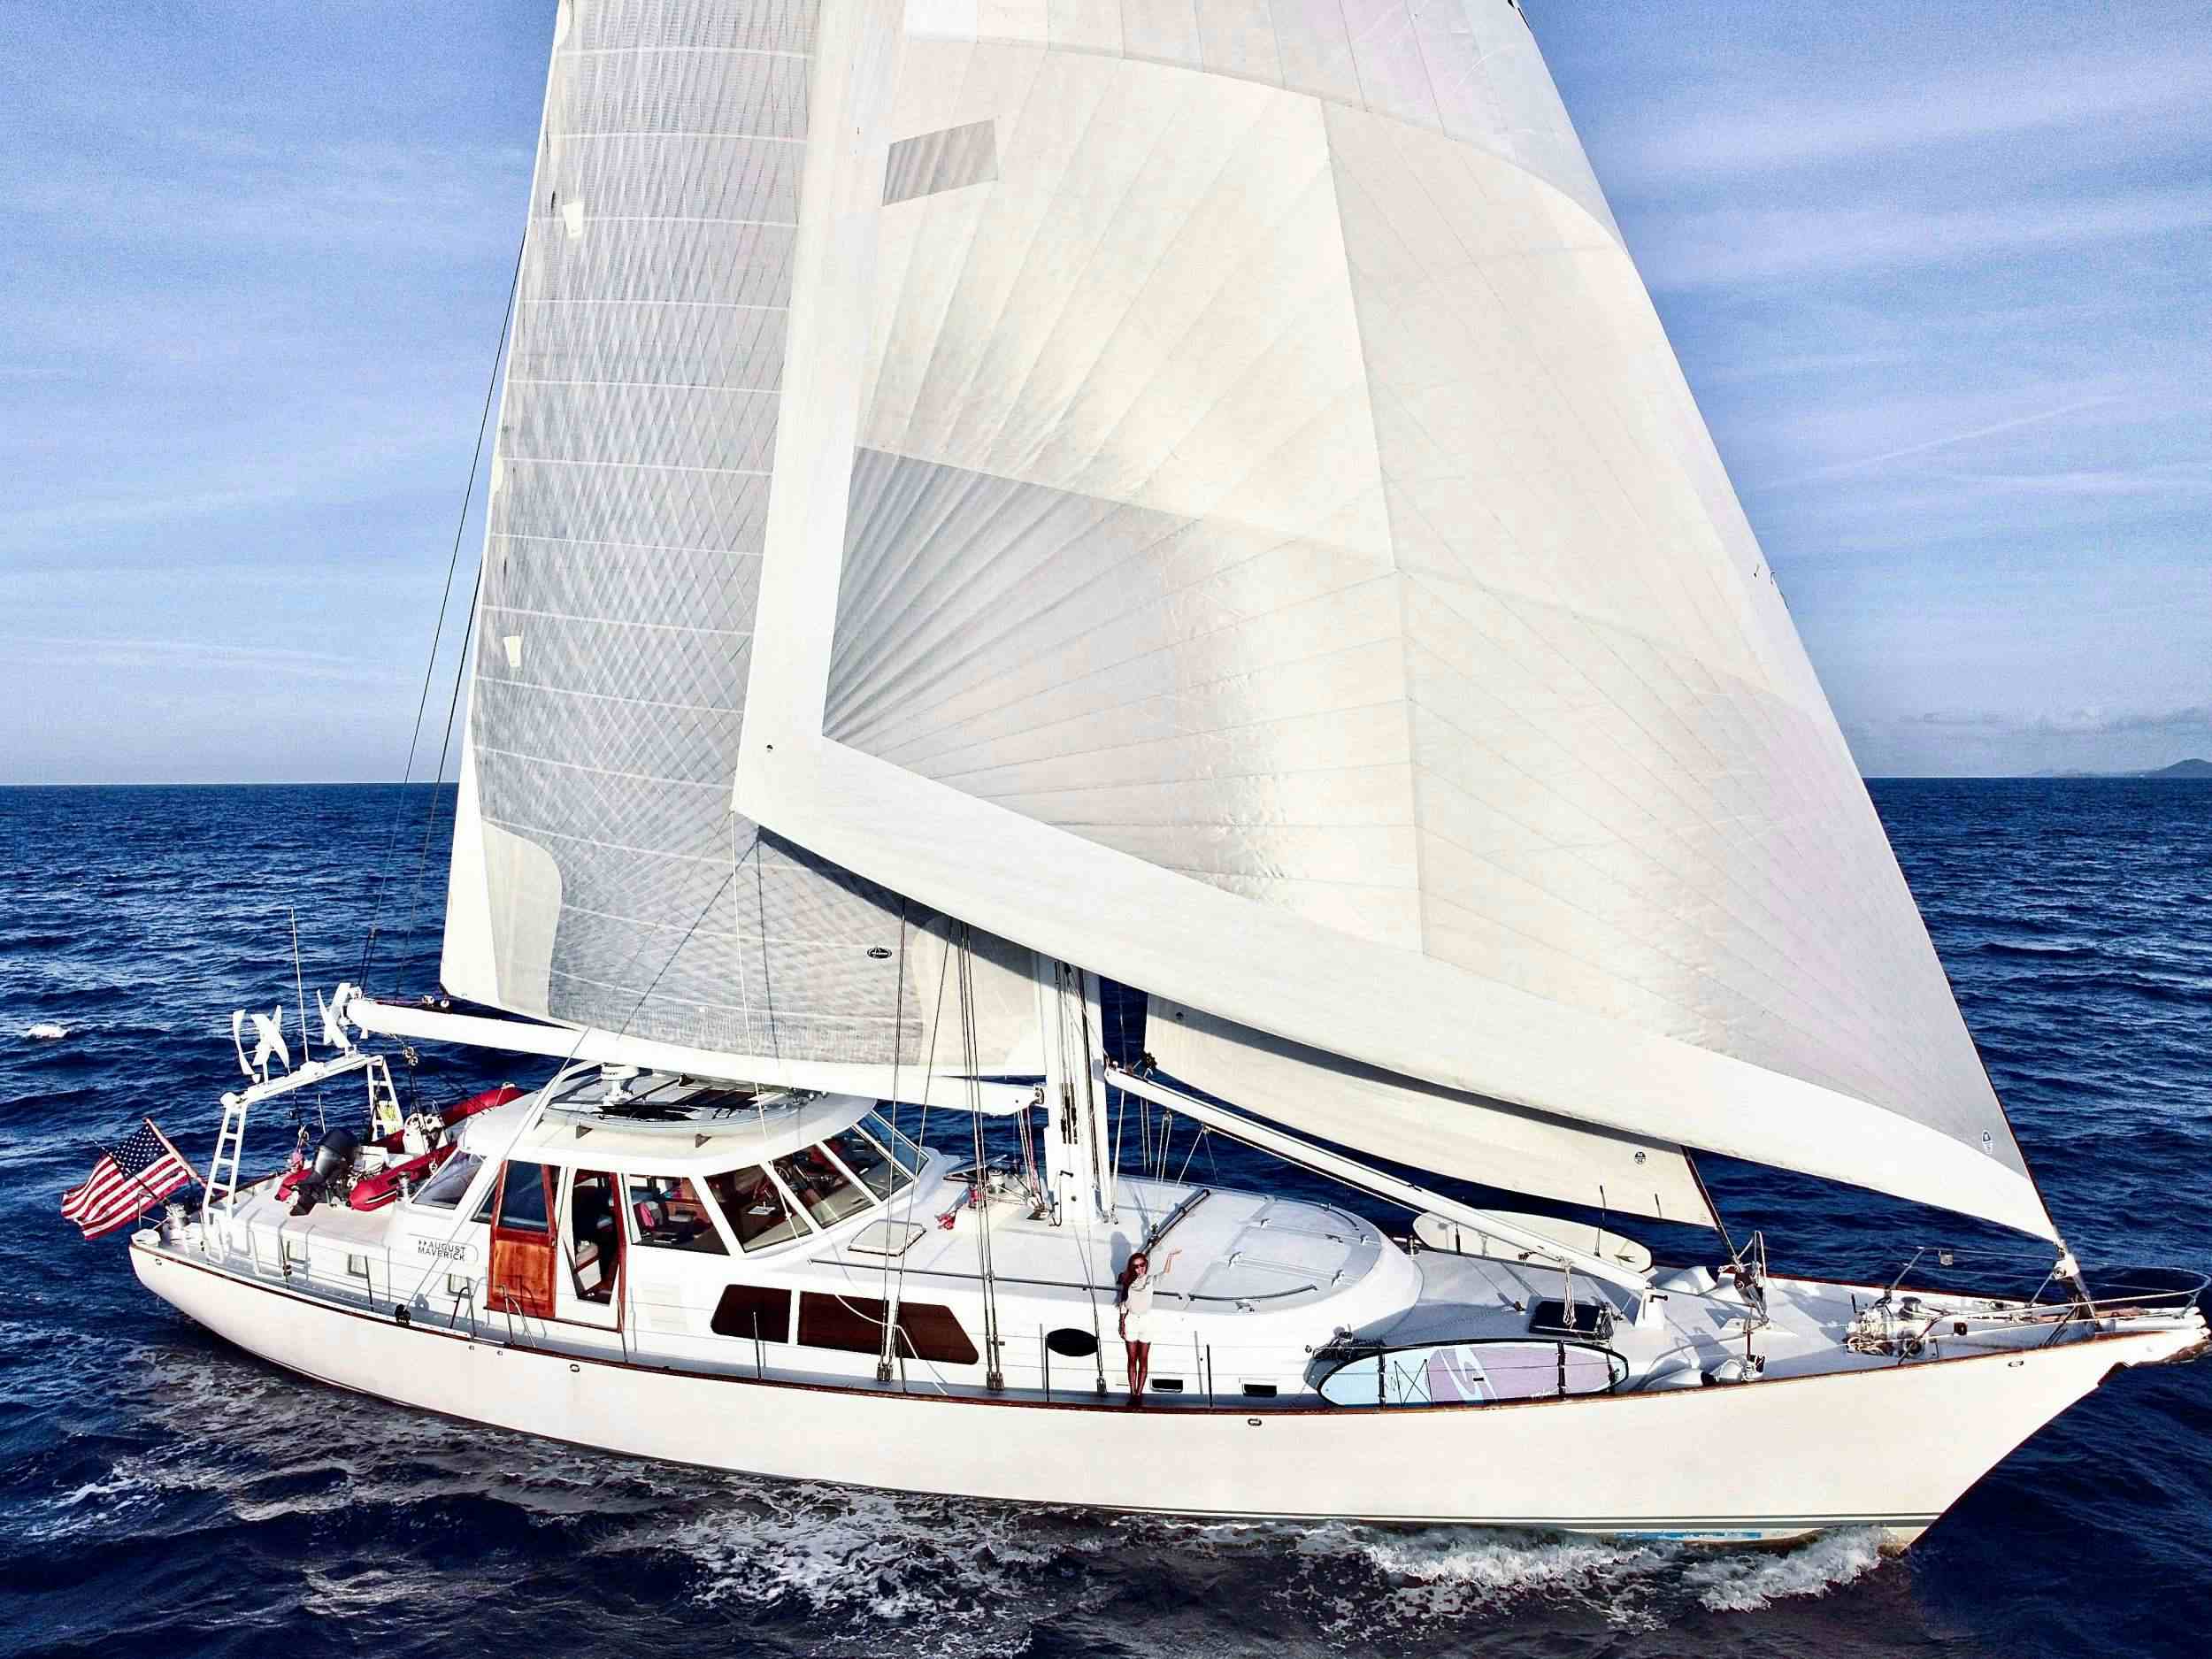 august maverick - Sailboat Charter Guadeloupe & Boat hire in Caribbean 1